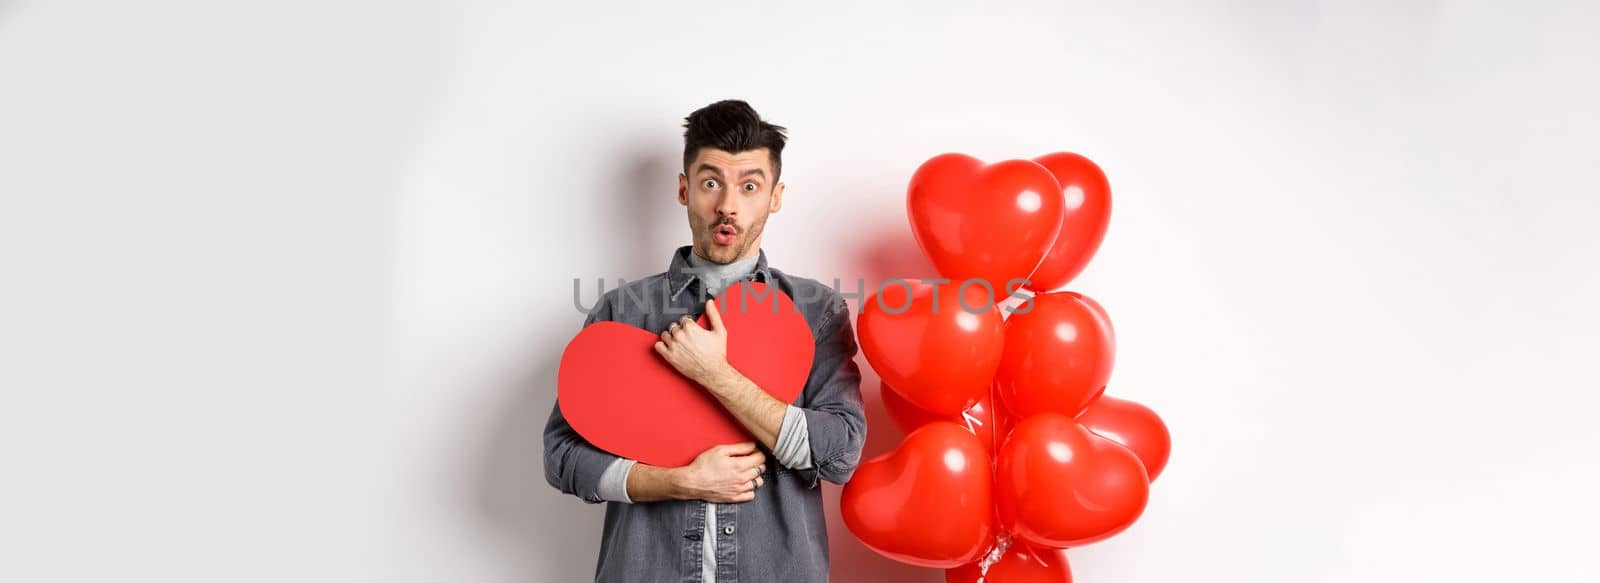 Surprised man holding Valentines heart card and saying wow, looking amazed at camera, receive secret confession on lovers day, standing near romantic balloons on white background.